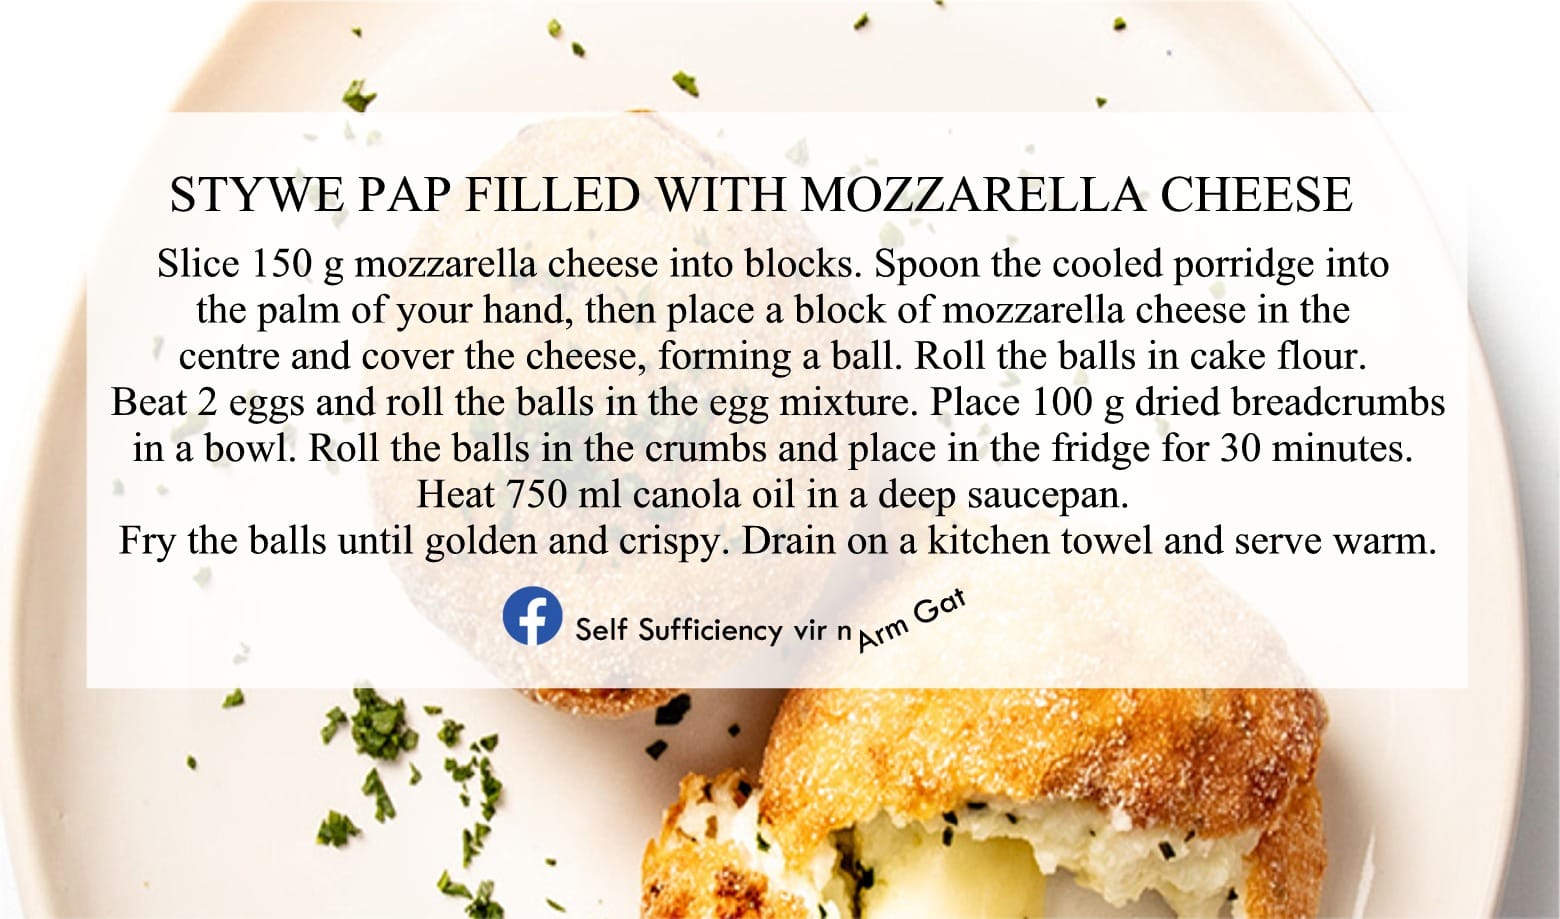 Stywe Pap Filled with Mozzarella Cheese